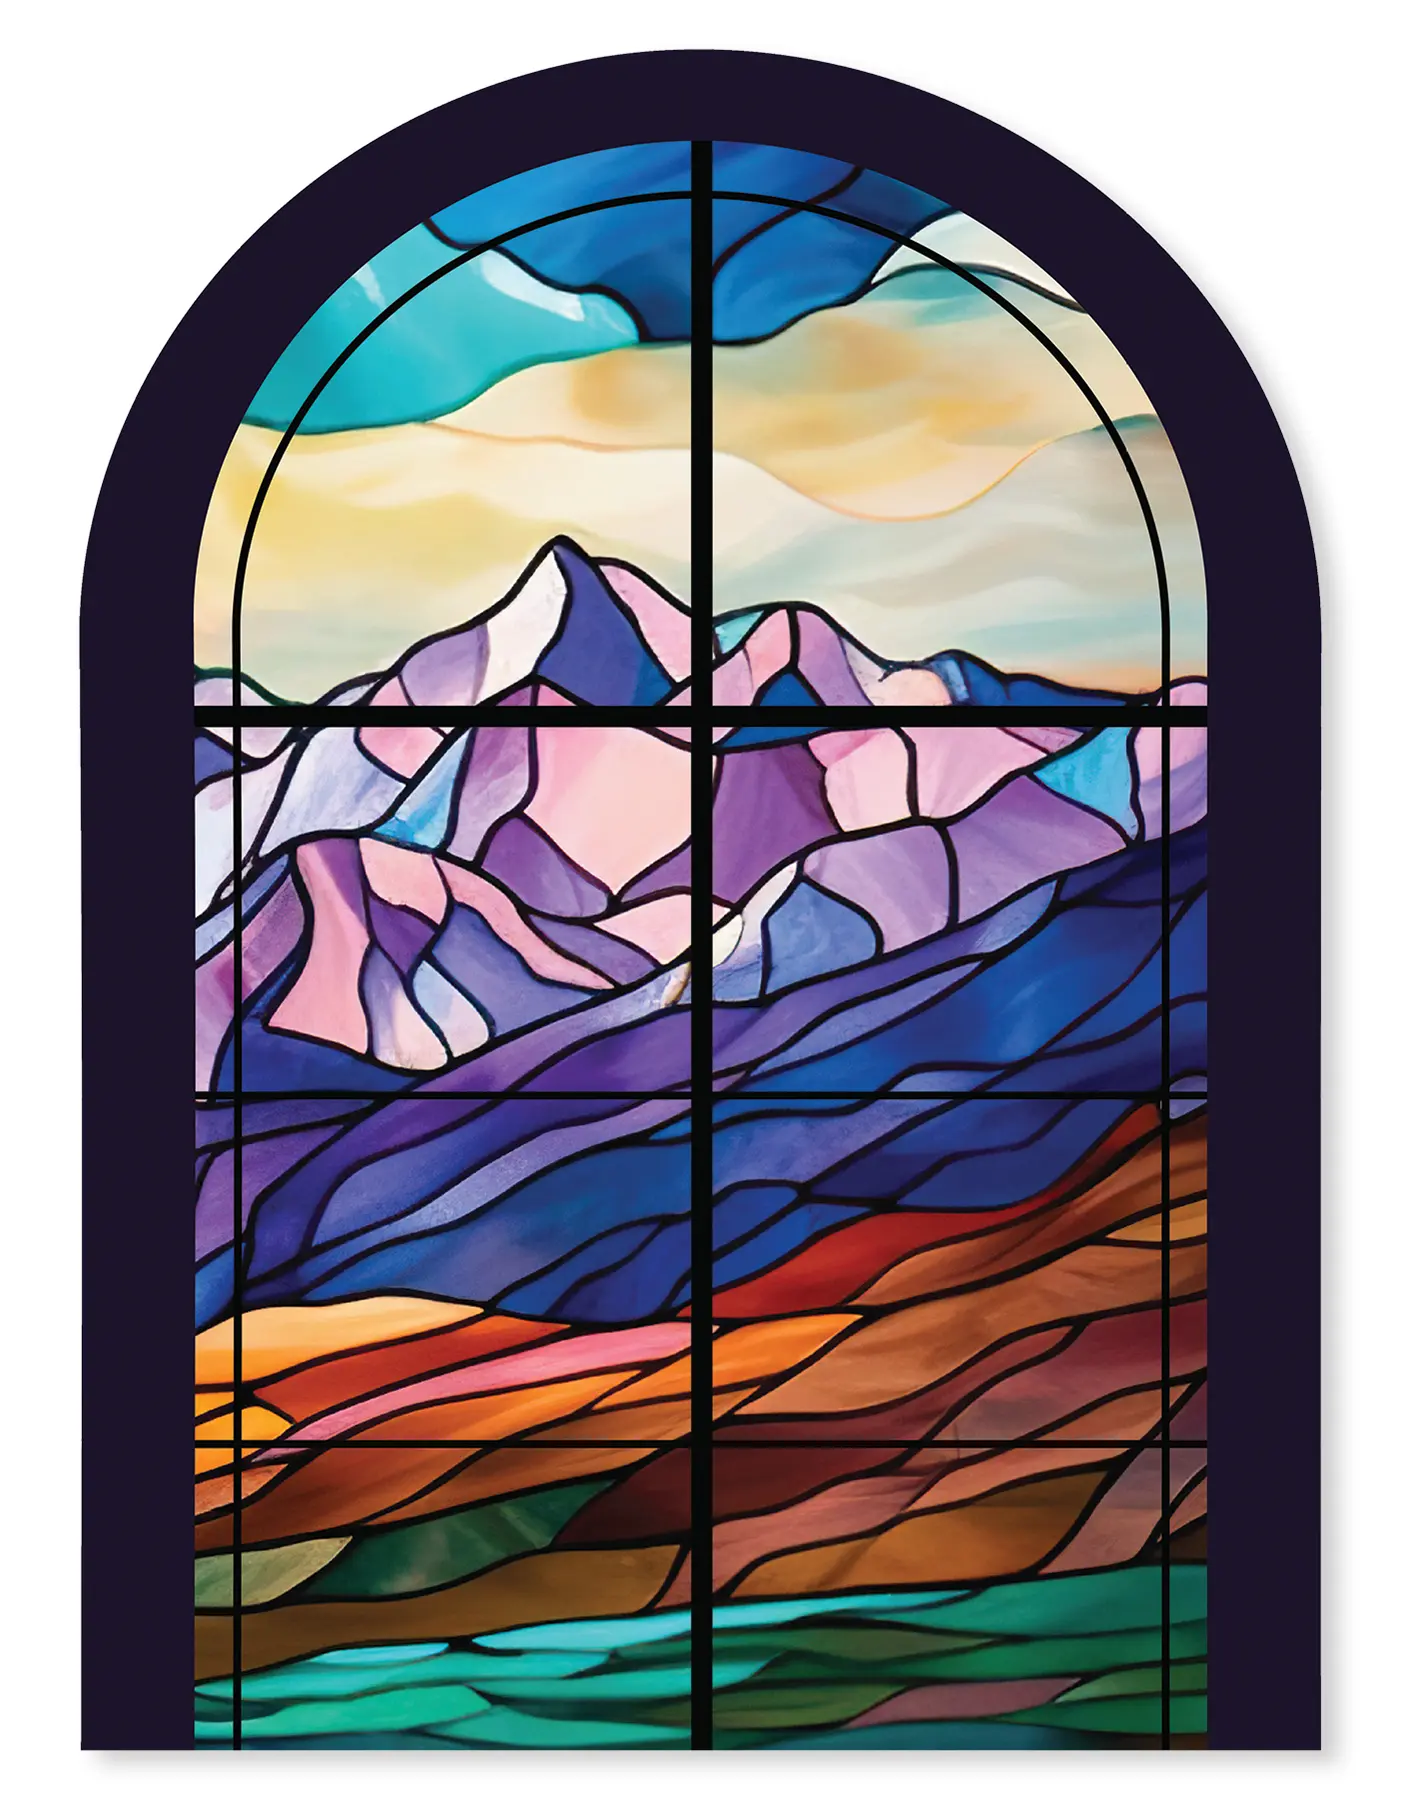 Stained-glass window with mountains and clouds.